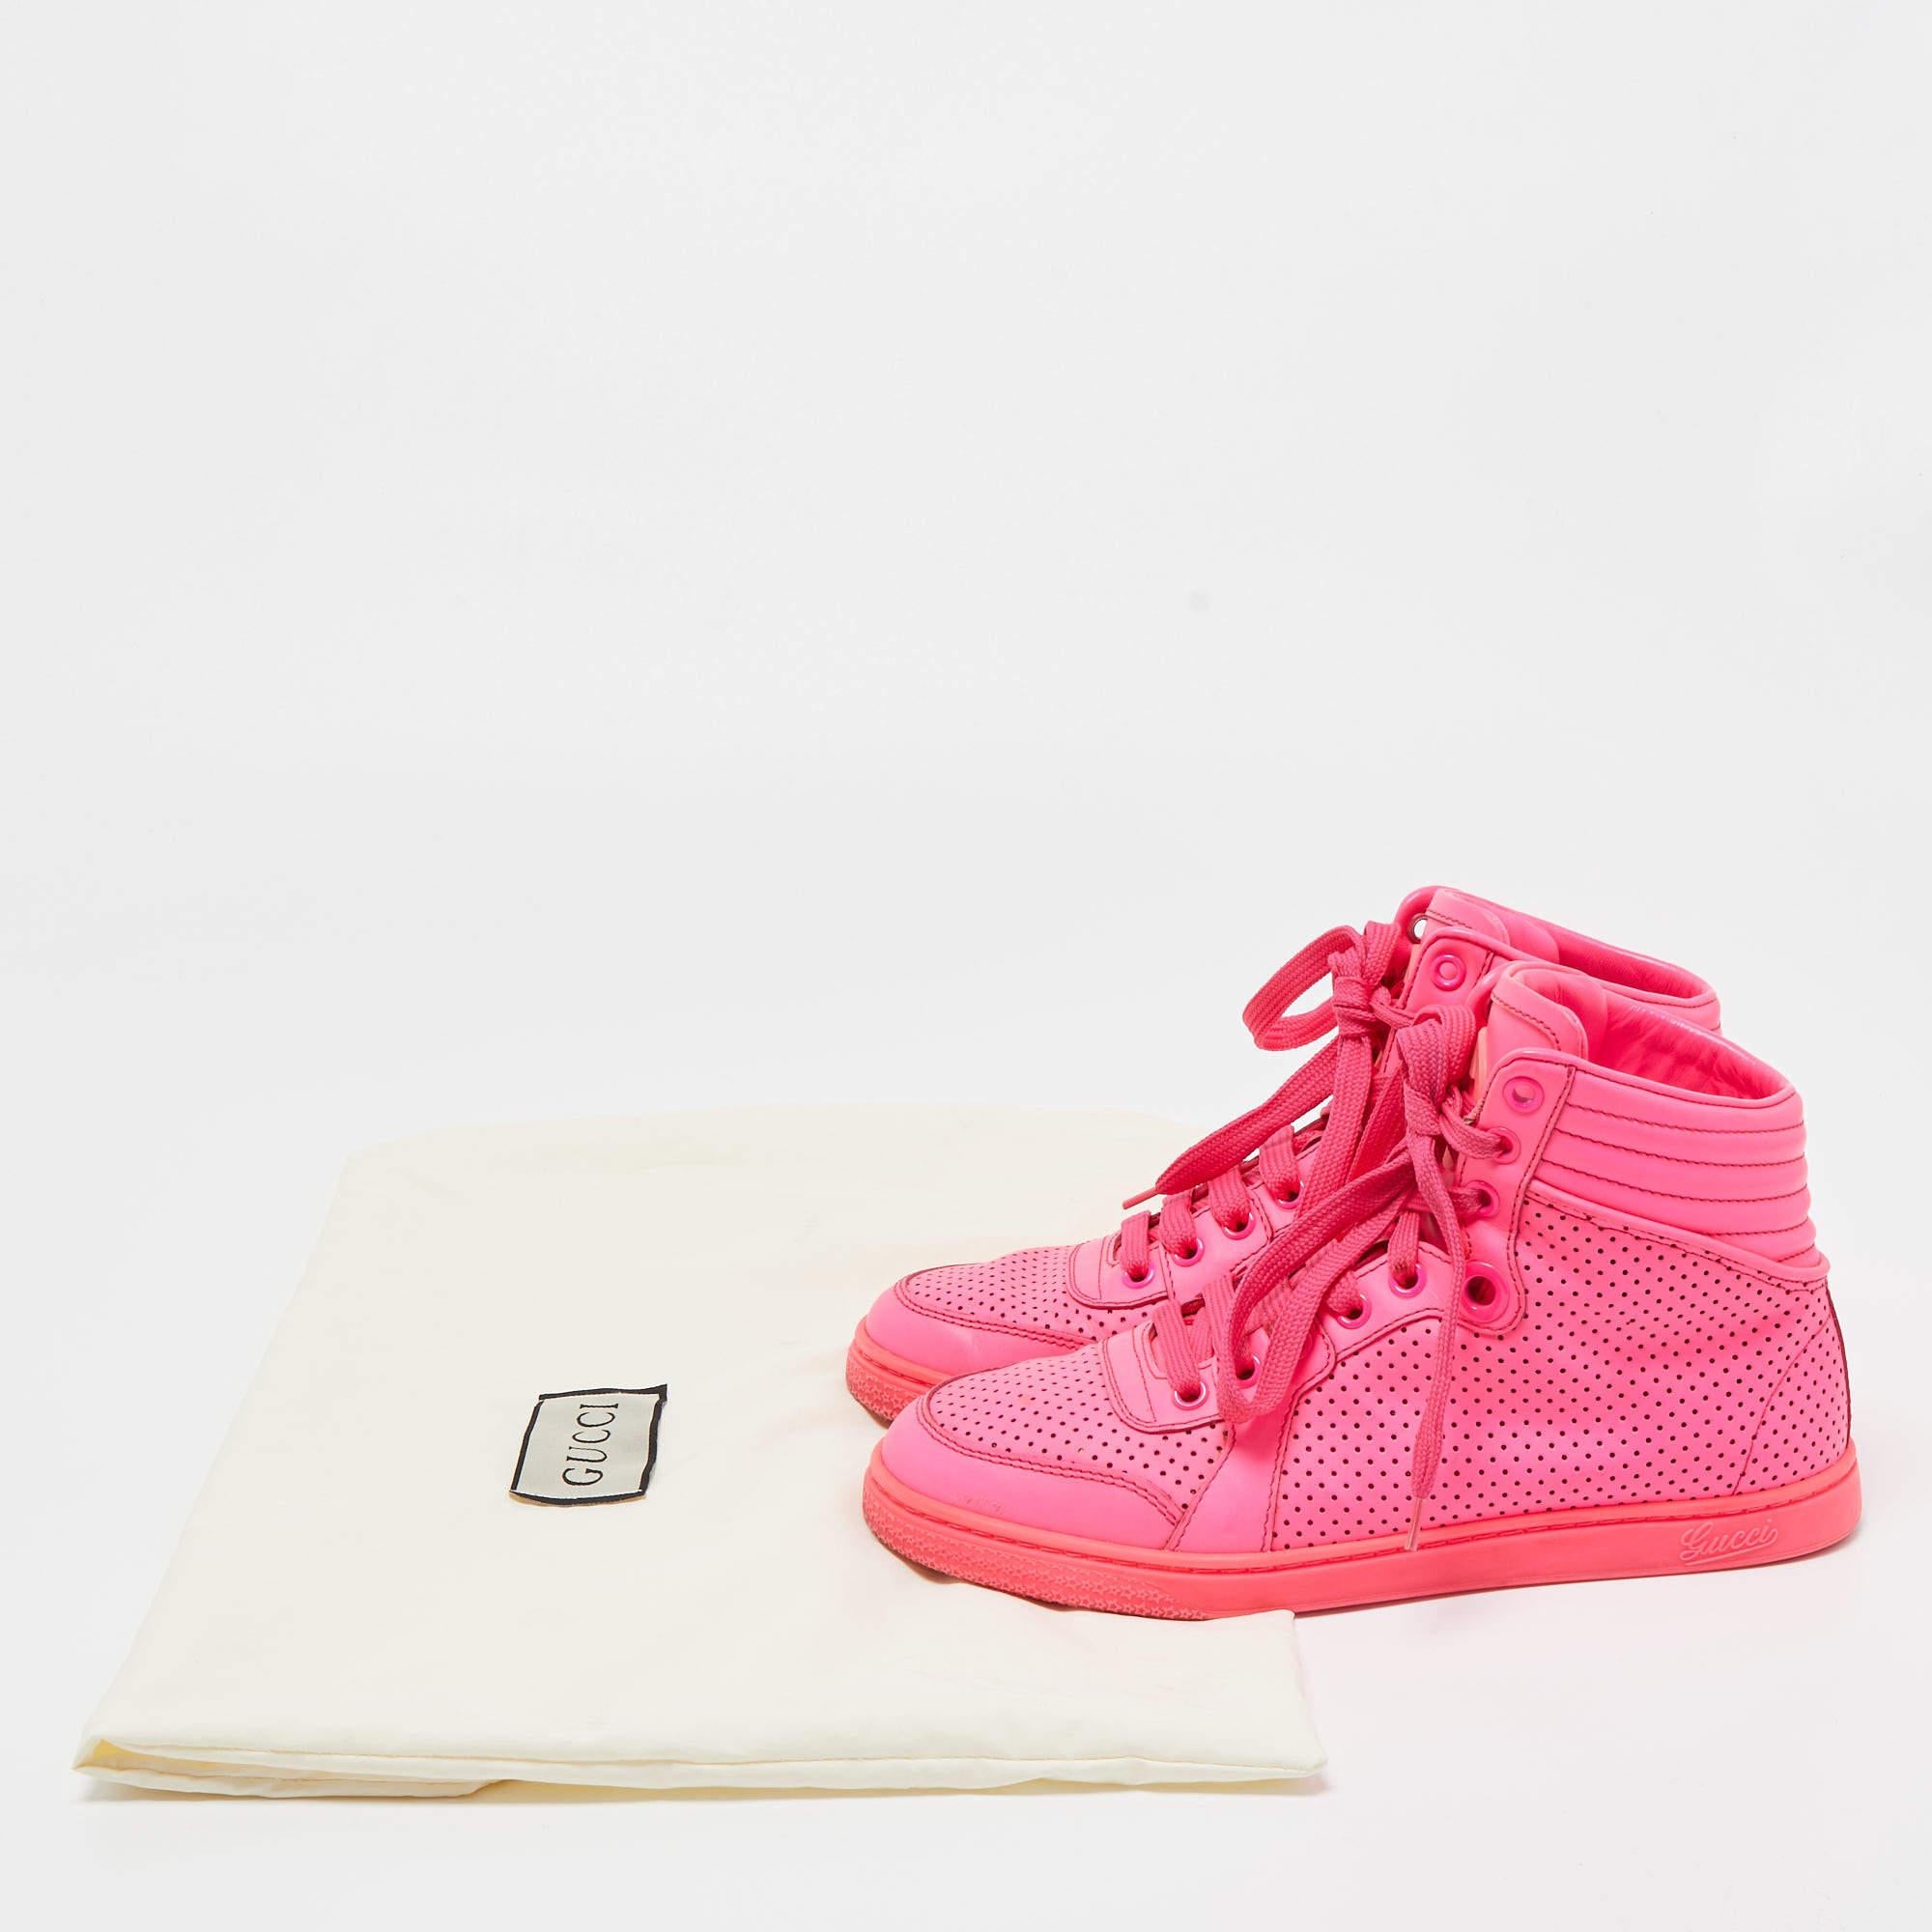 Gucci Neon Pink Perforated Leather Coda High Top Sneakers Size 35.5 5